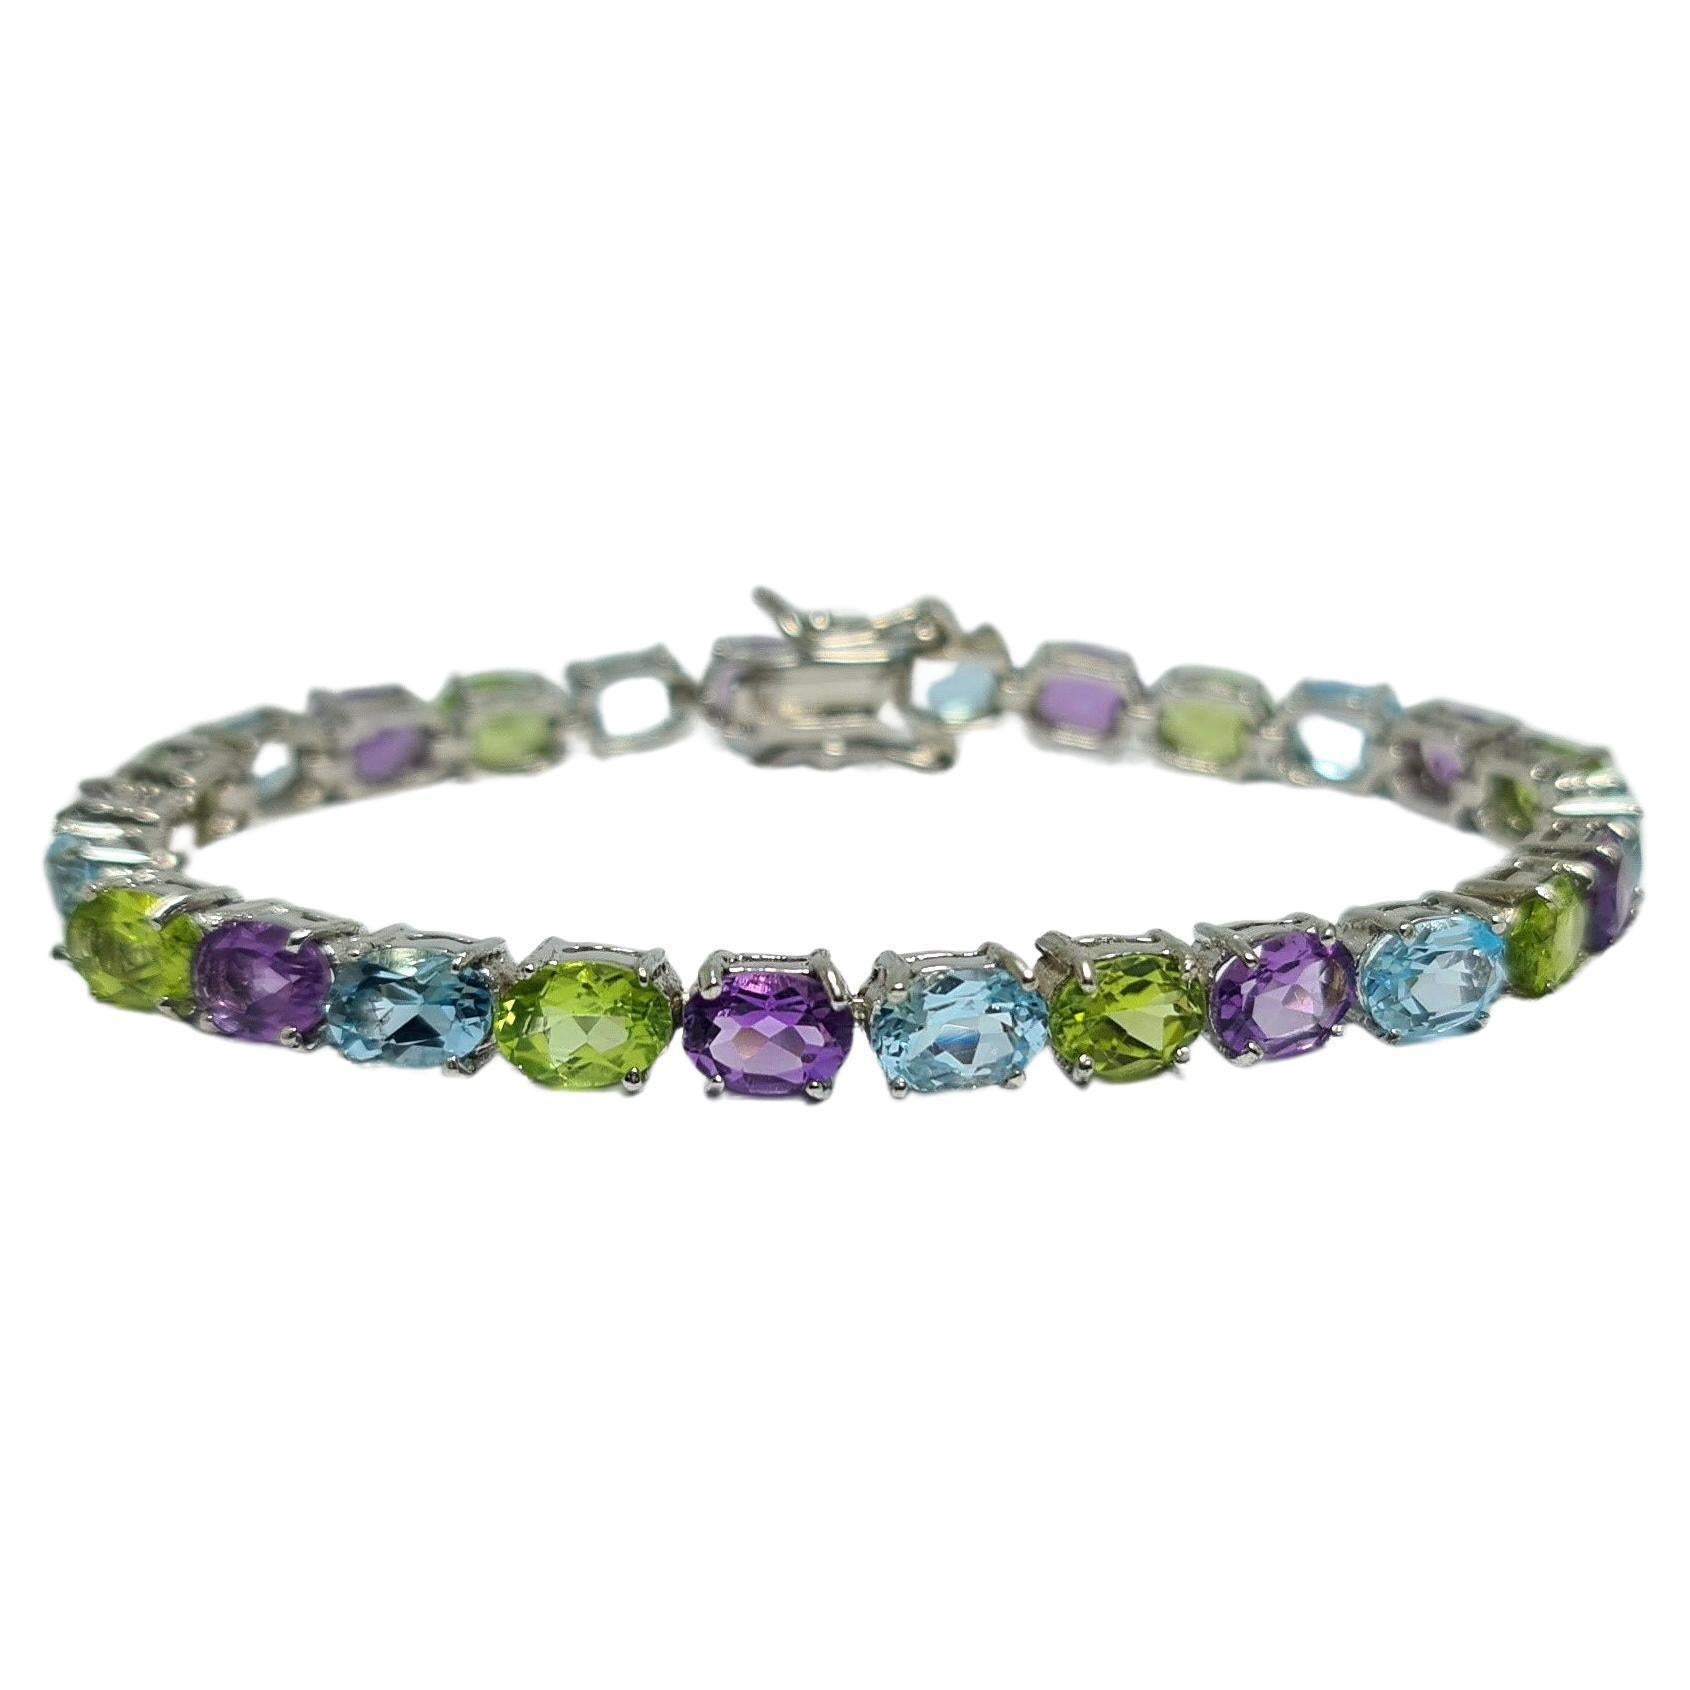 Natural Blue Topaz Amethyst Peridot Tennis Bracelet Set in pure.925 Sterling Silver Rhodium Plated
7 inches 